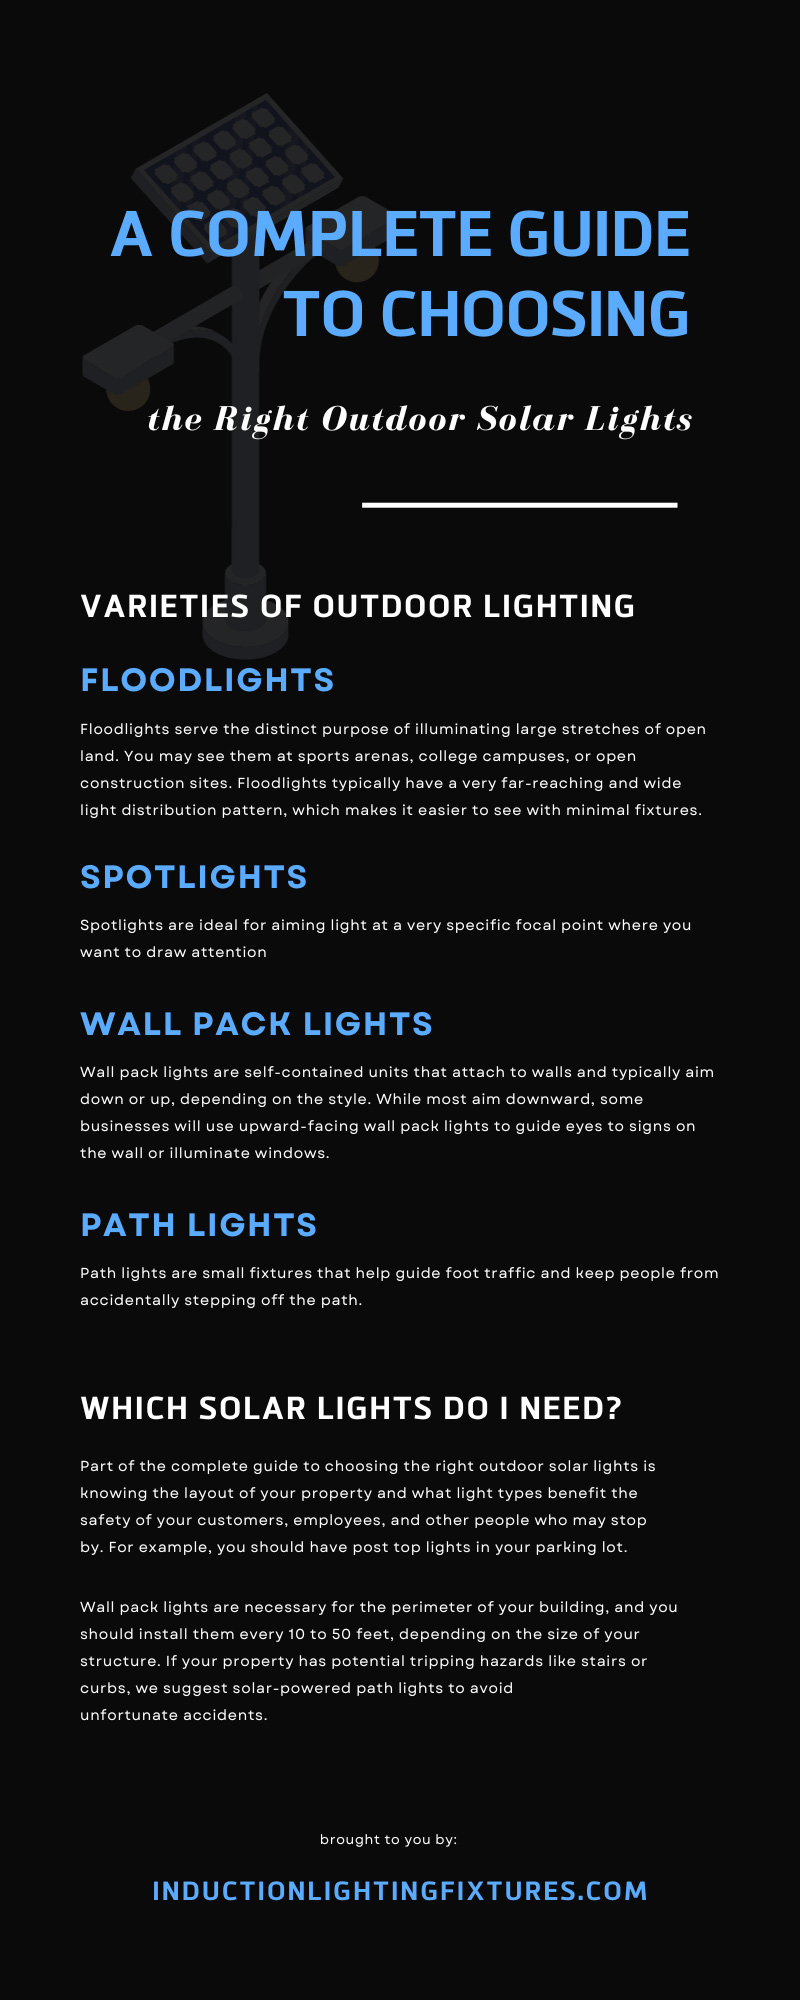 A Complete Guide to Choosing the Right Outdoor Solar Lights